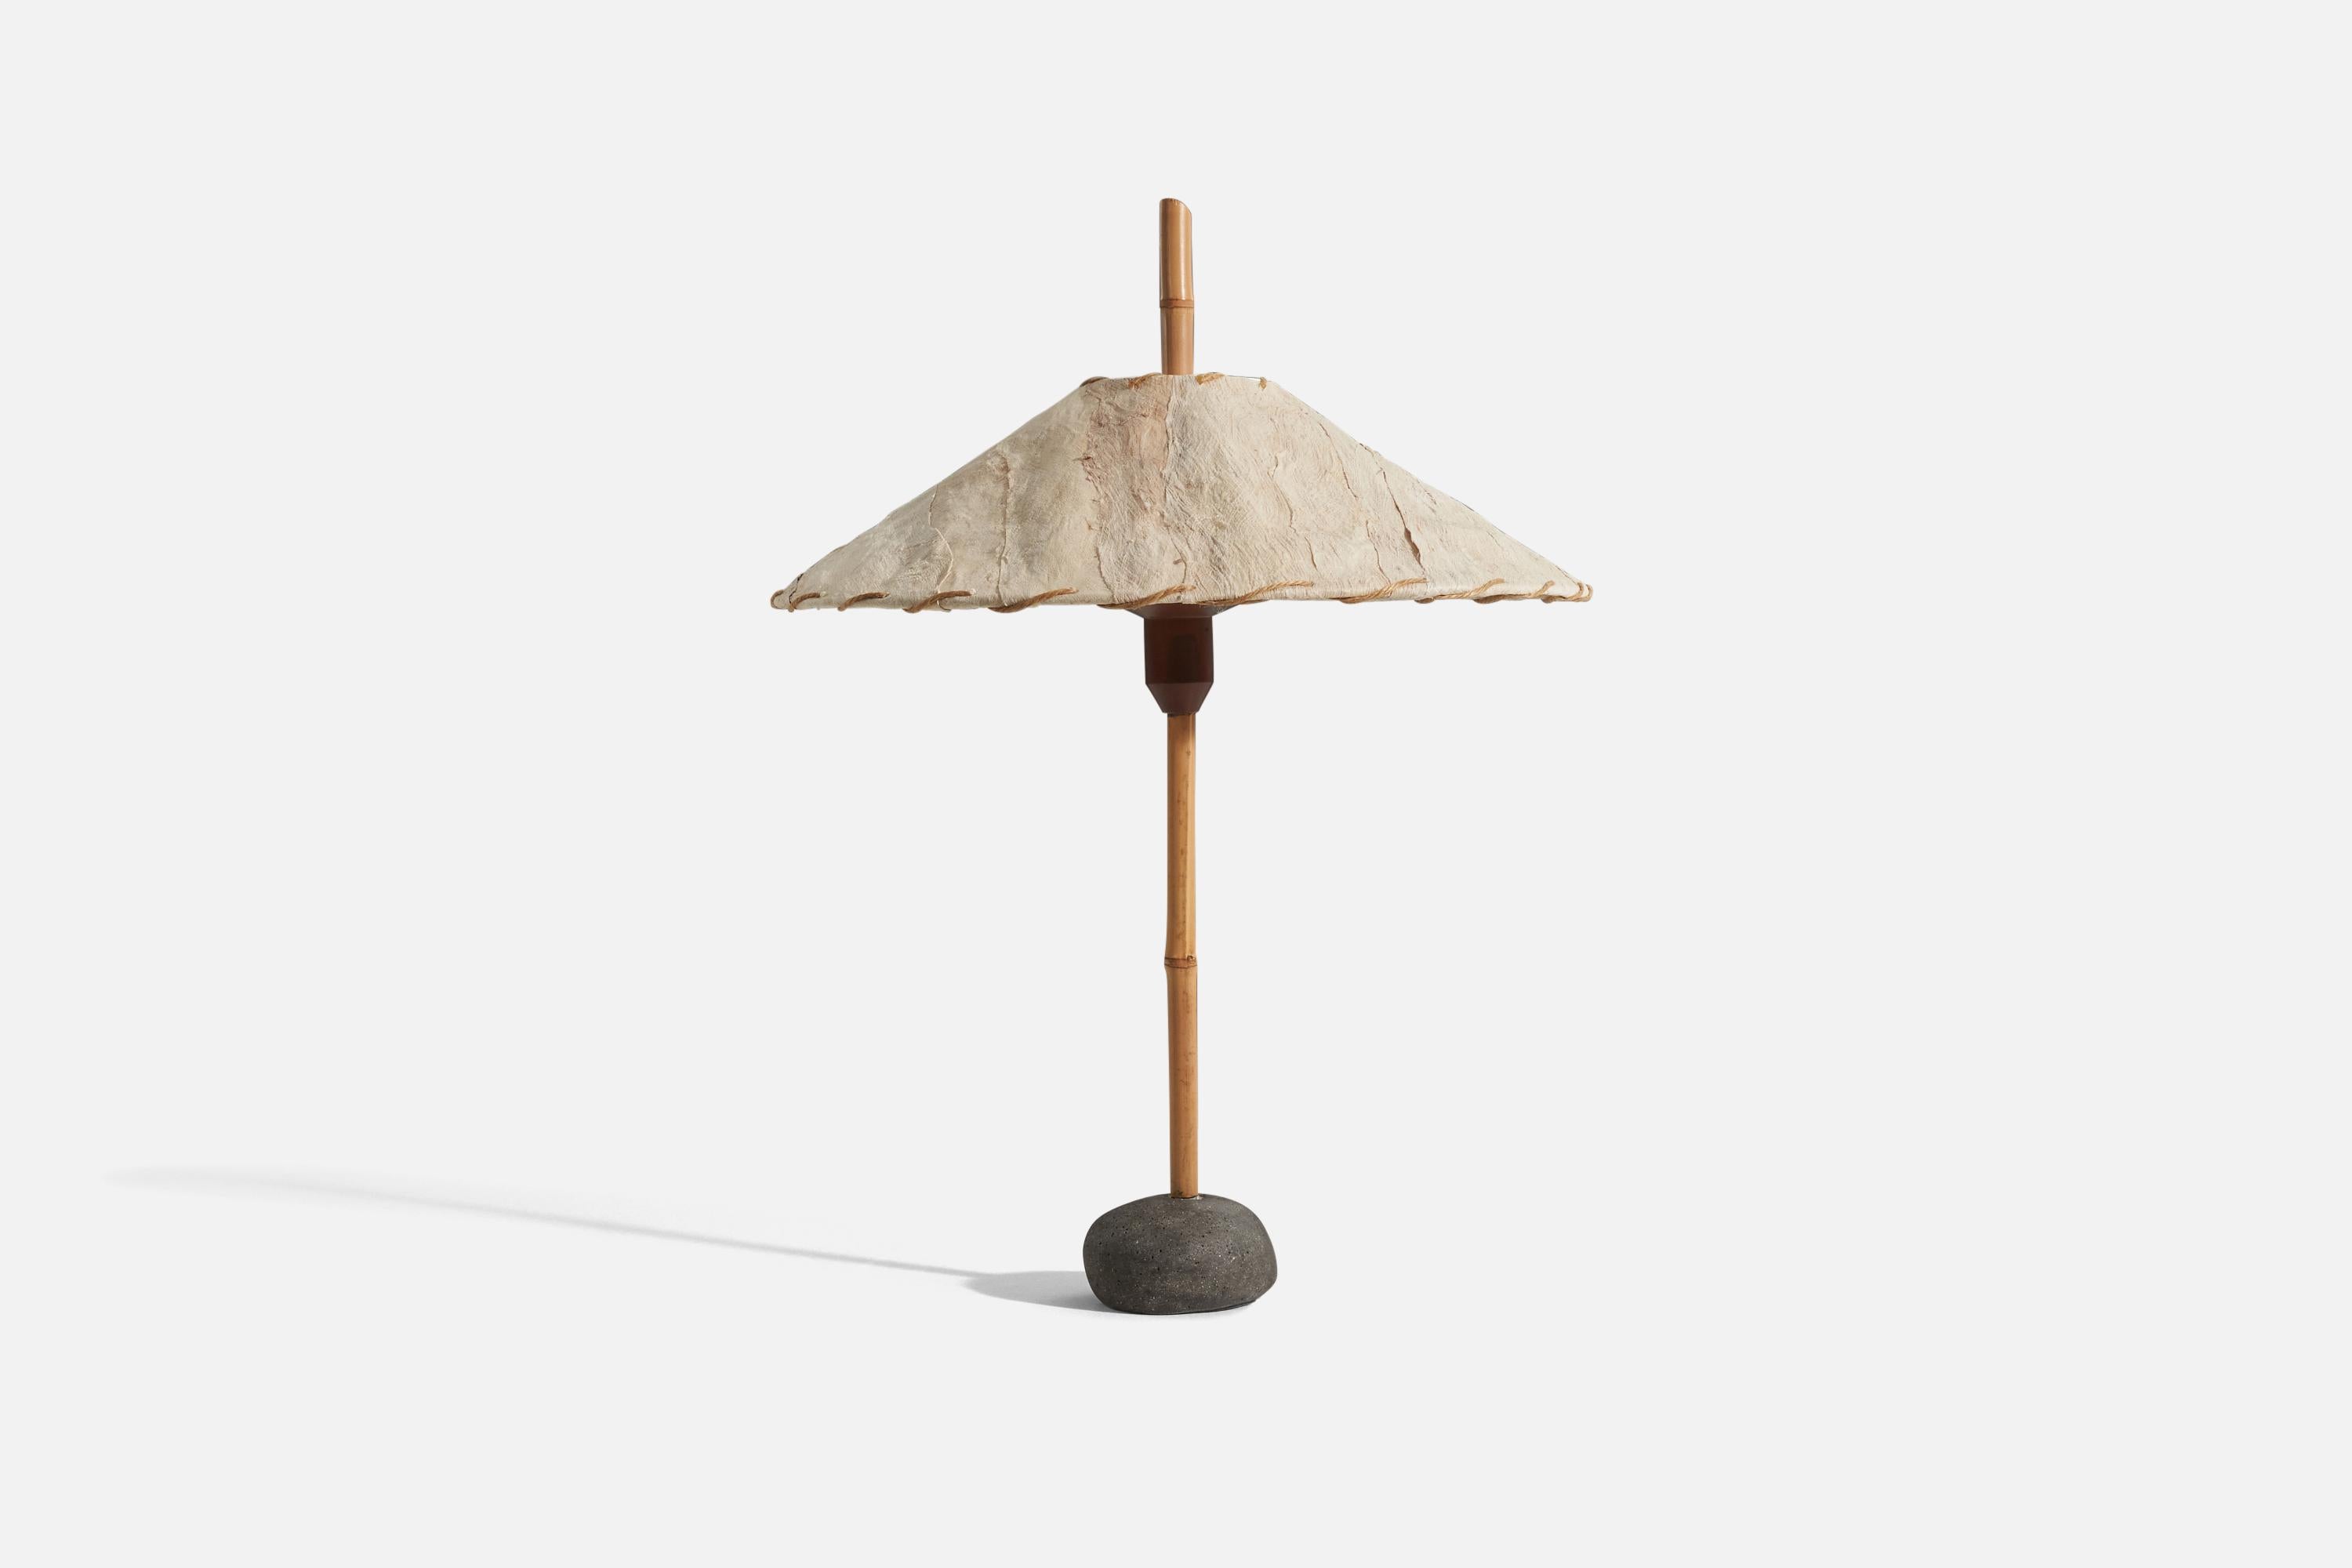 A table lamp designed by Robert Sonneman for his 